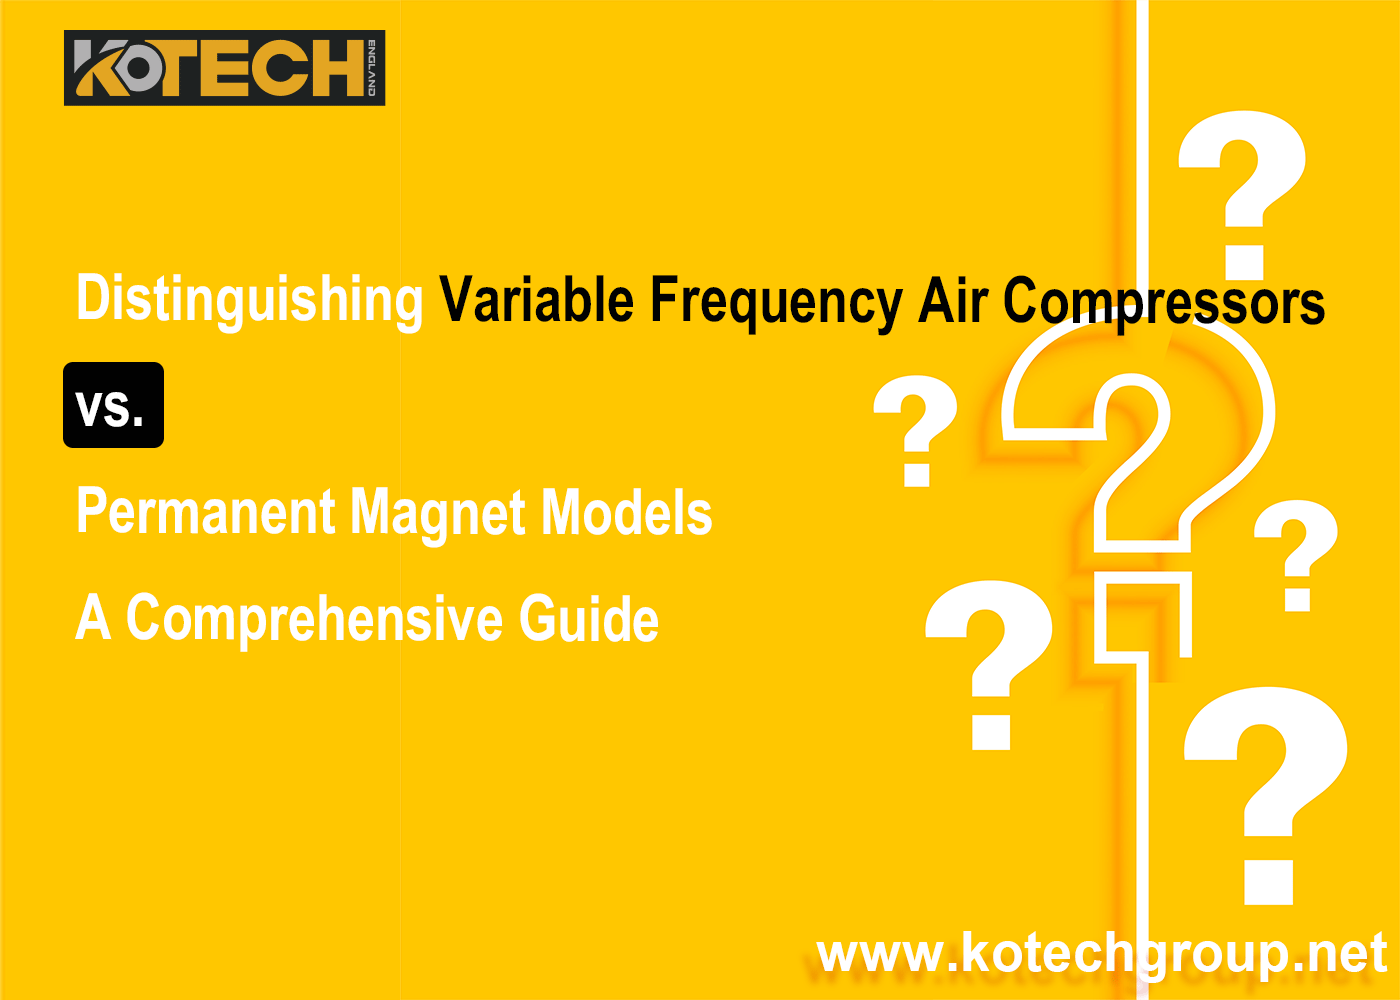 Distinguishing Variable Frequency Air Compressors vs. Permanent Magnet Models